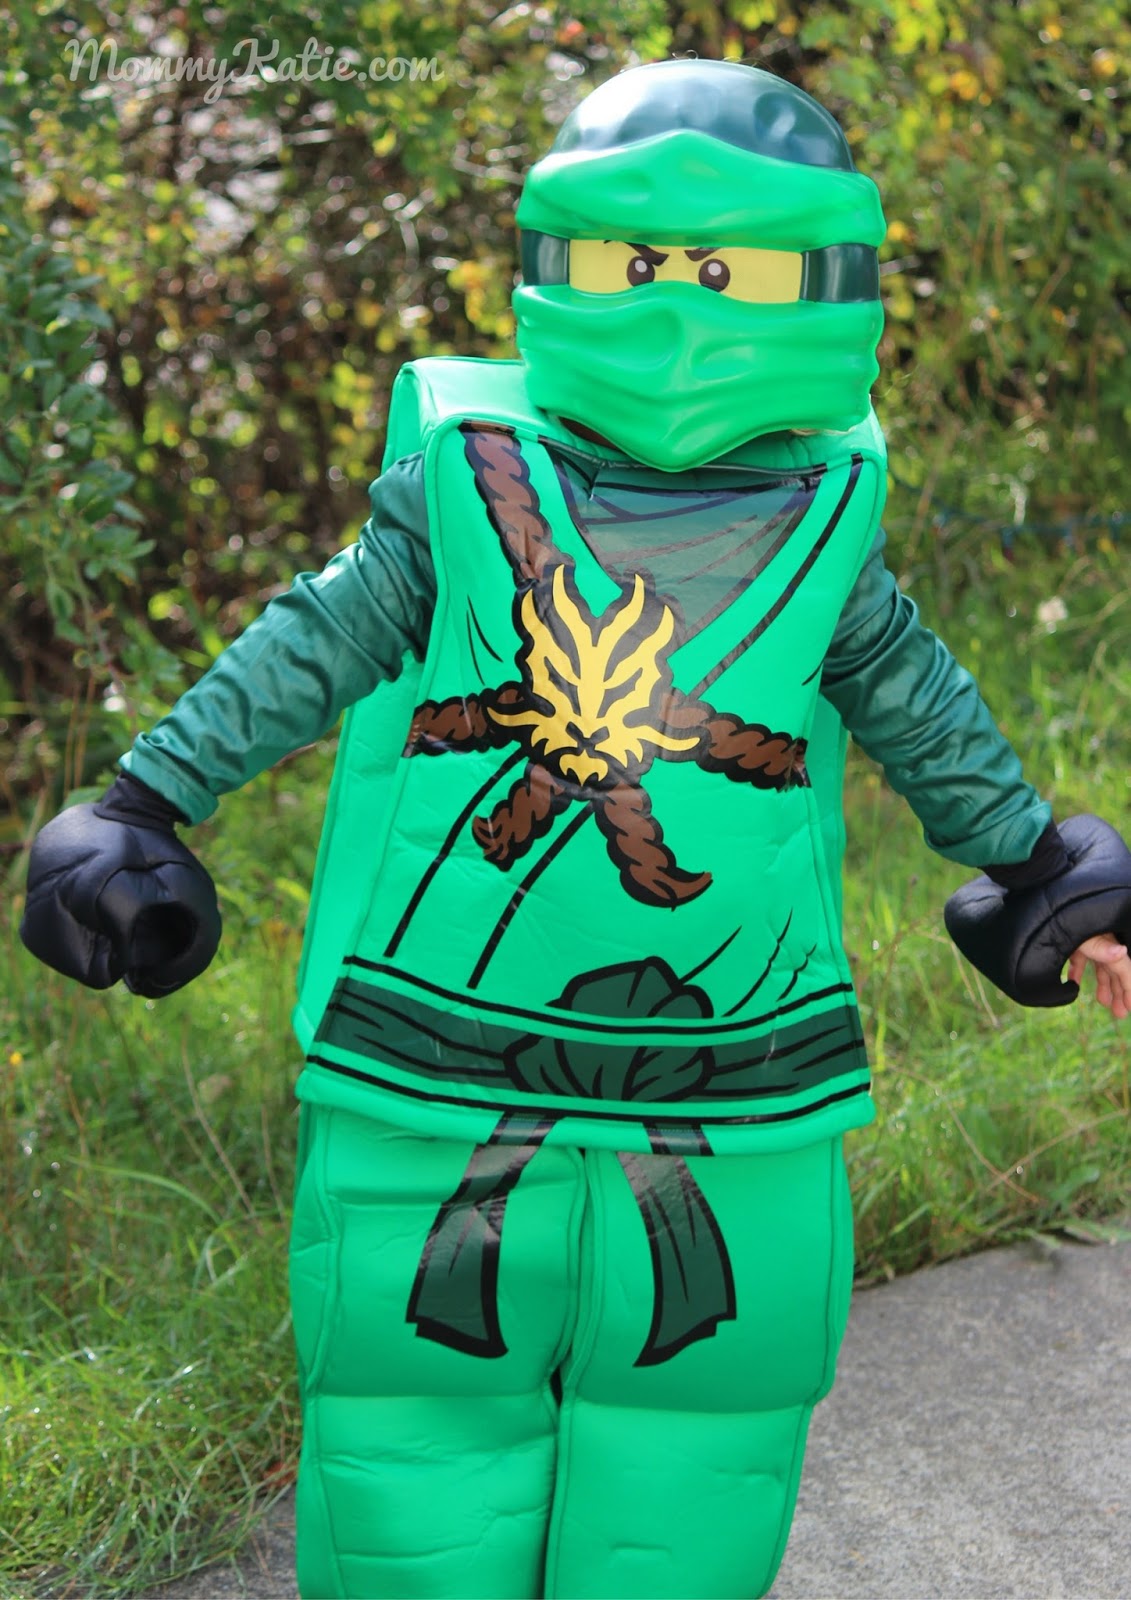 Lego Ninjago Costume From Disguise Costumes Mommy Katie